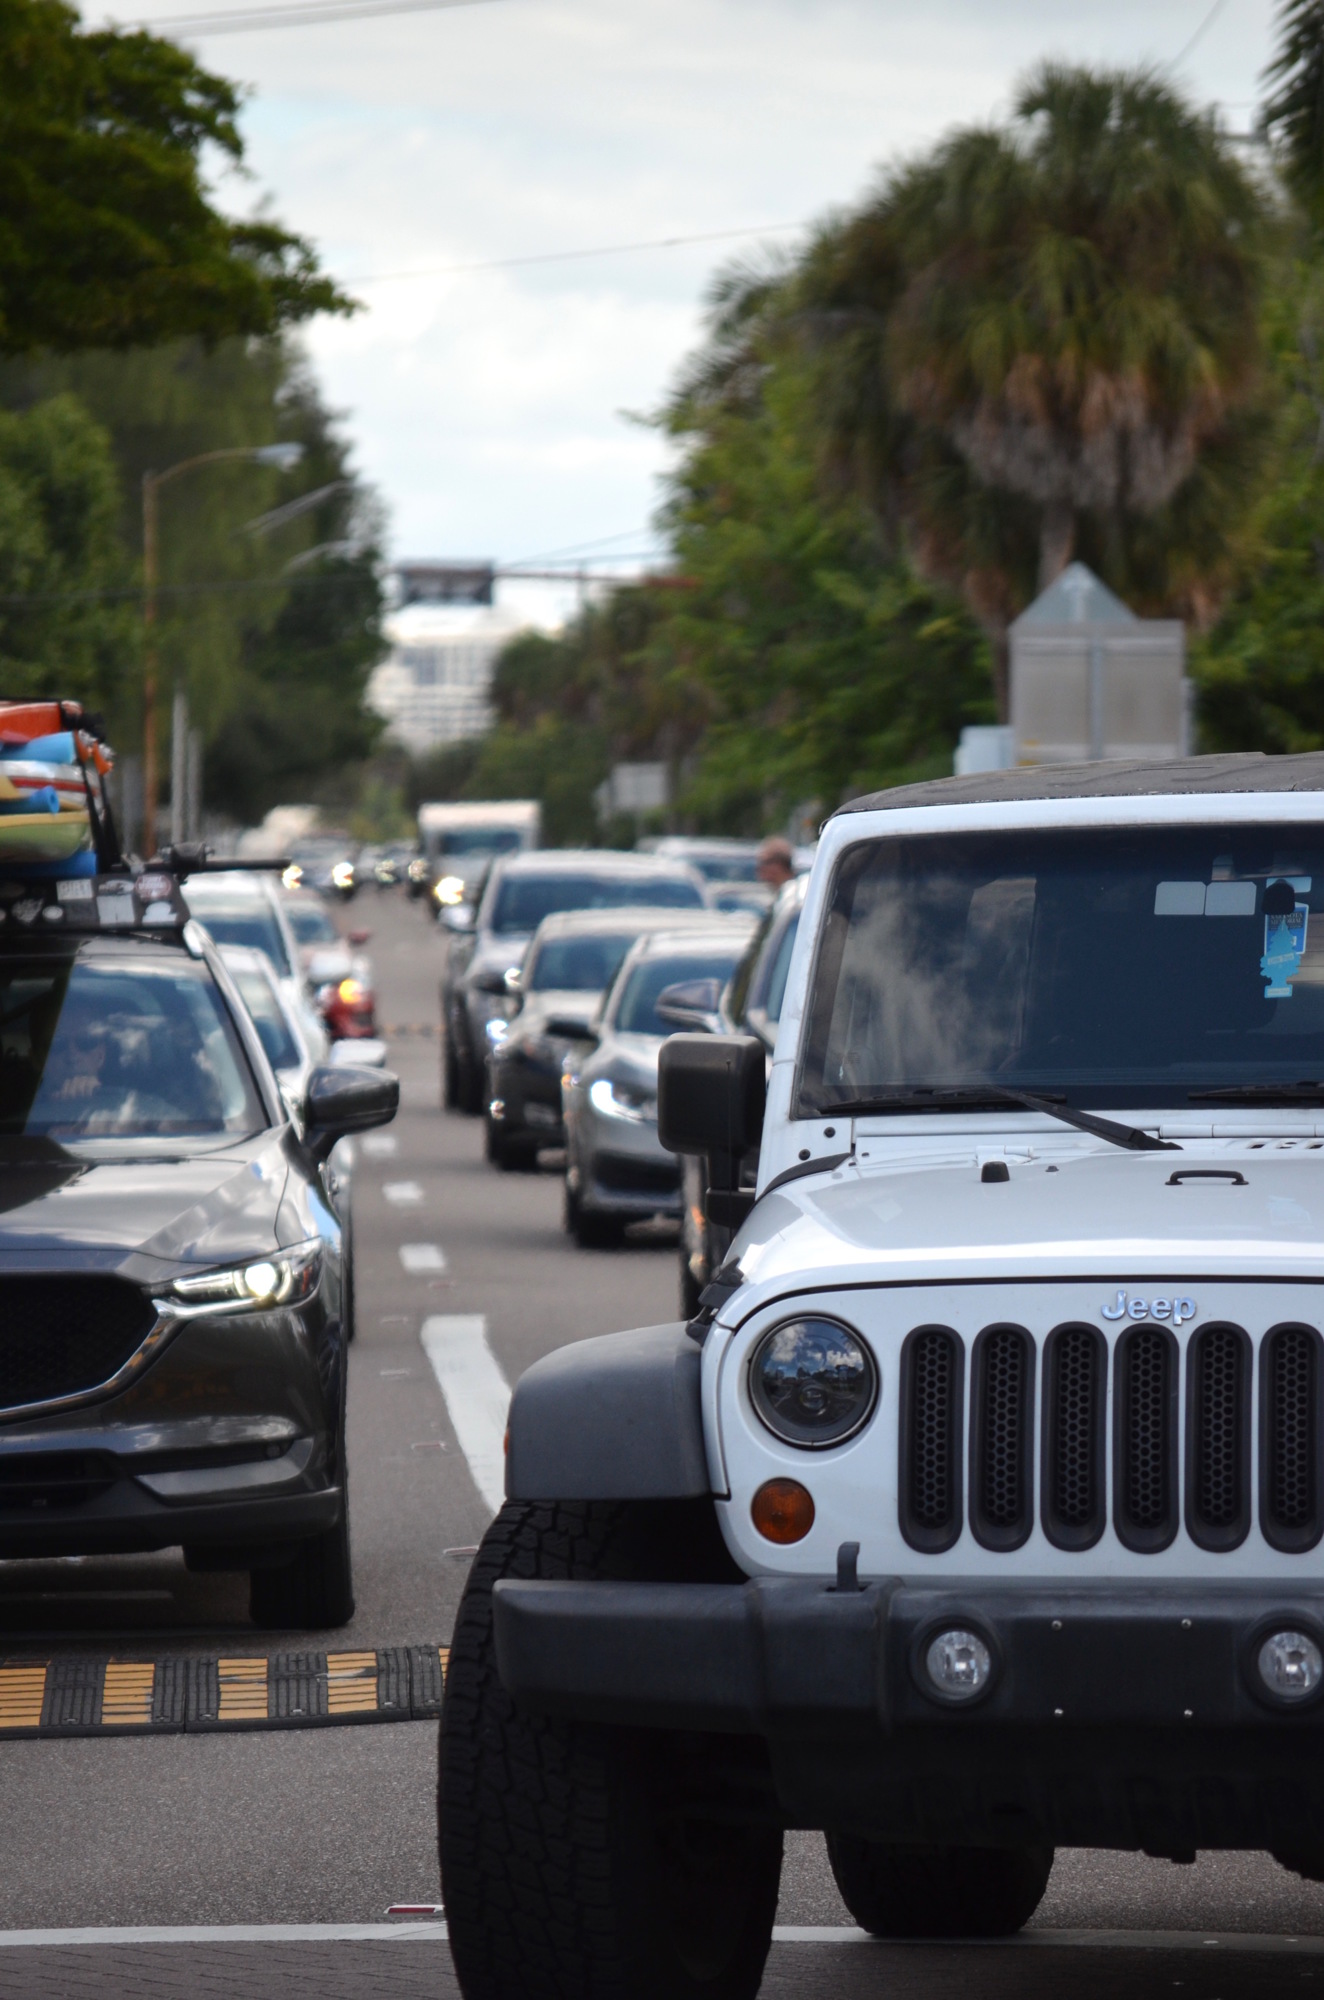 St. Armands Circle is often a bottleneck of traffic arriving and departing the barrier islands. (eric)